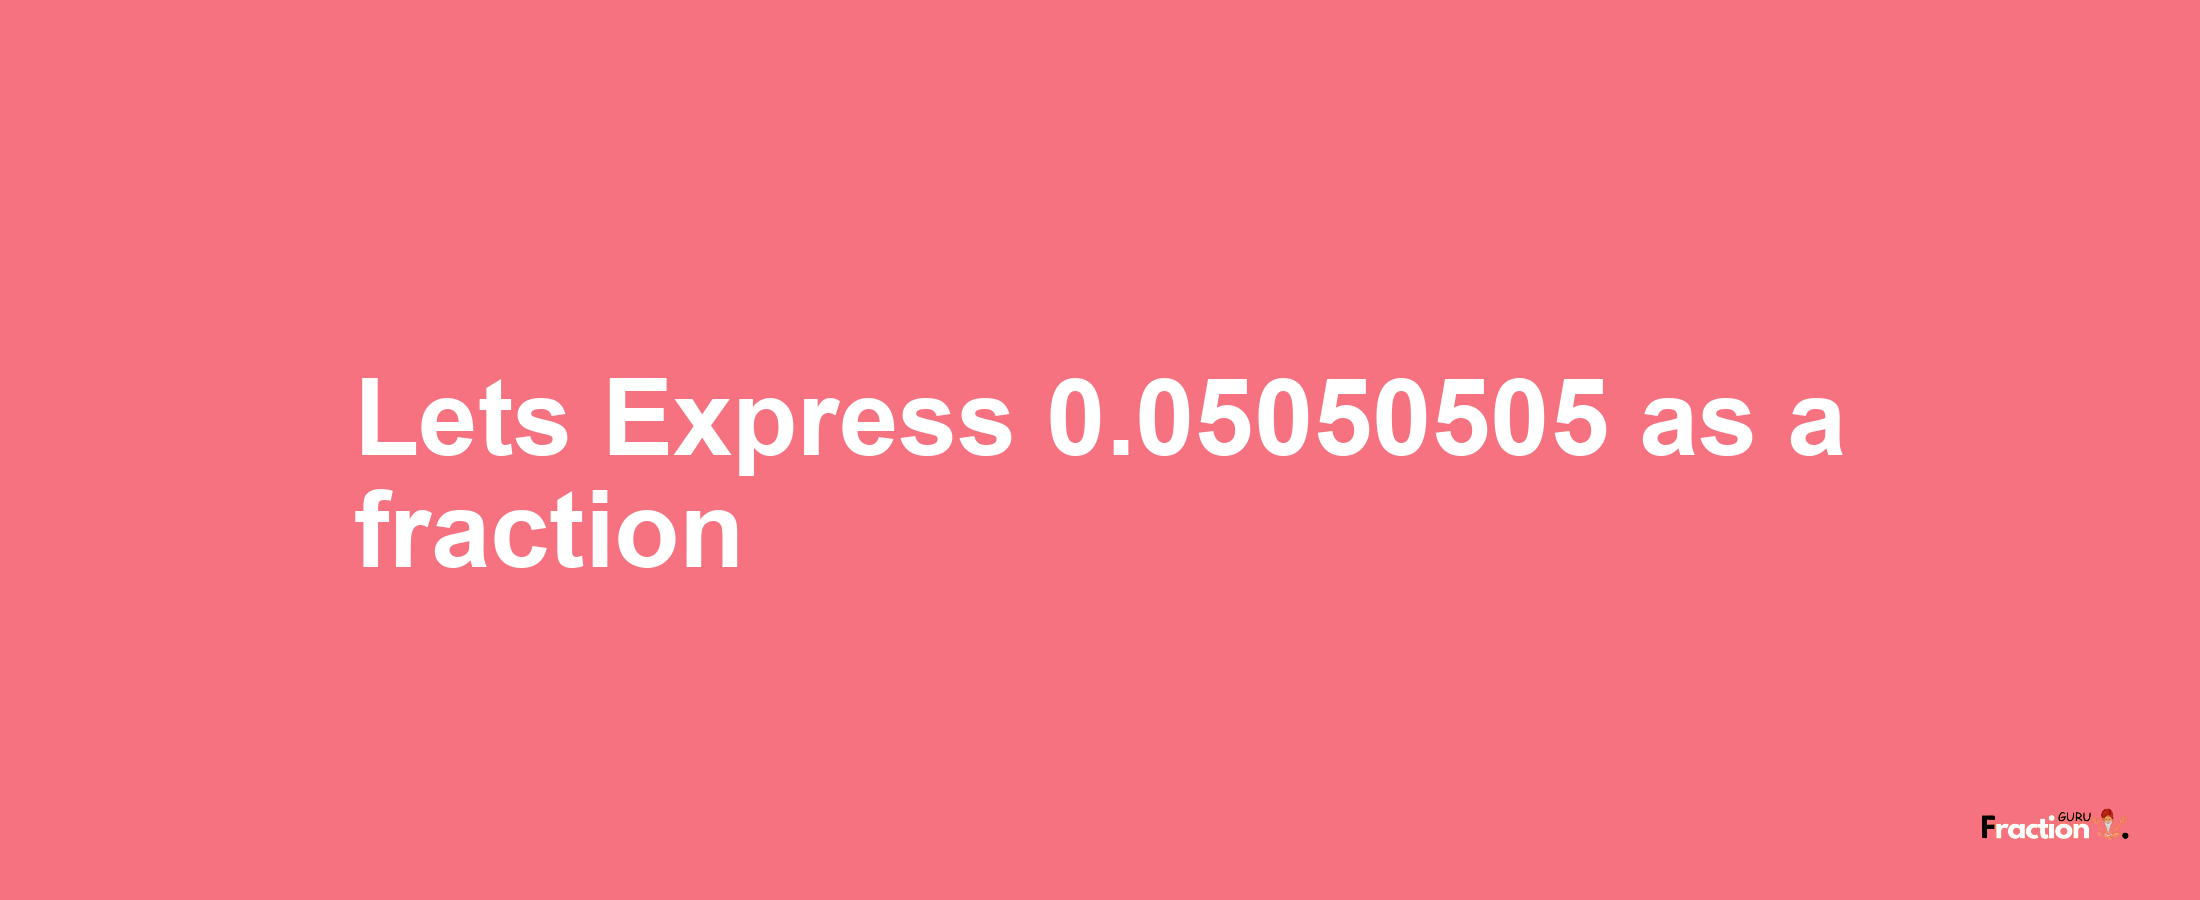 Lets Express 0.05050505 as afraction